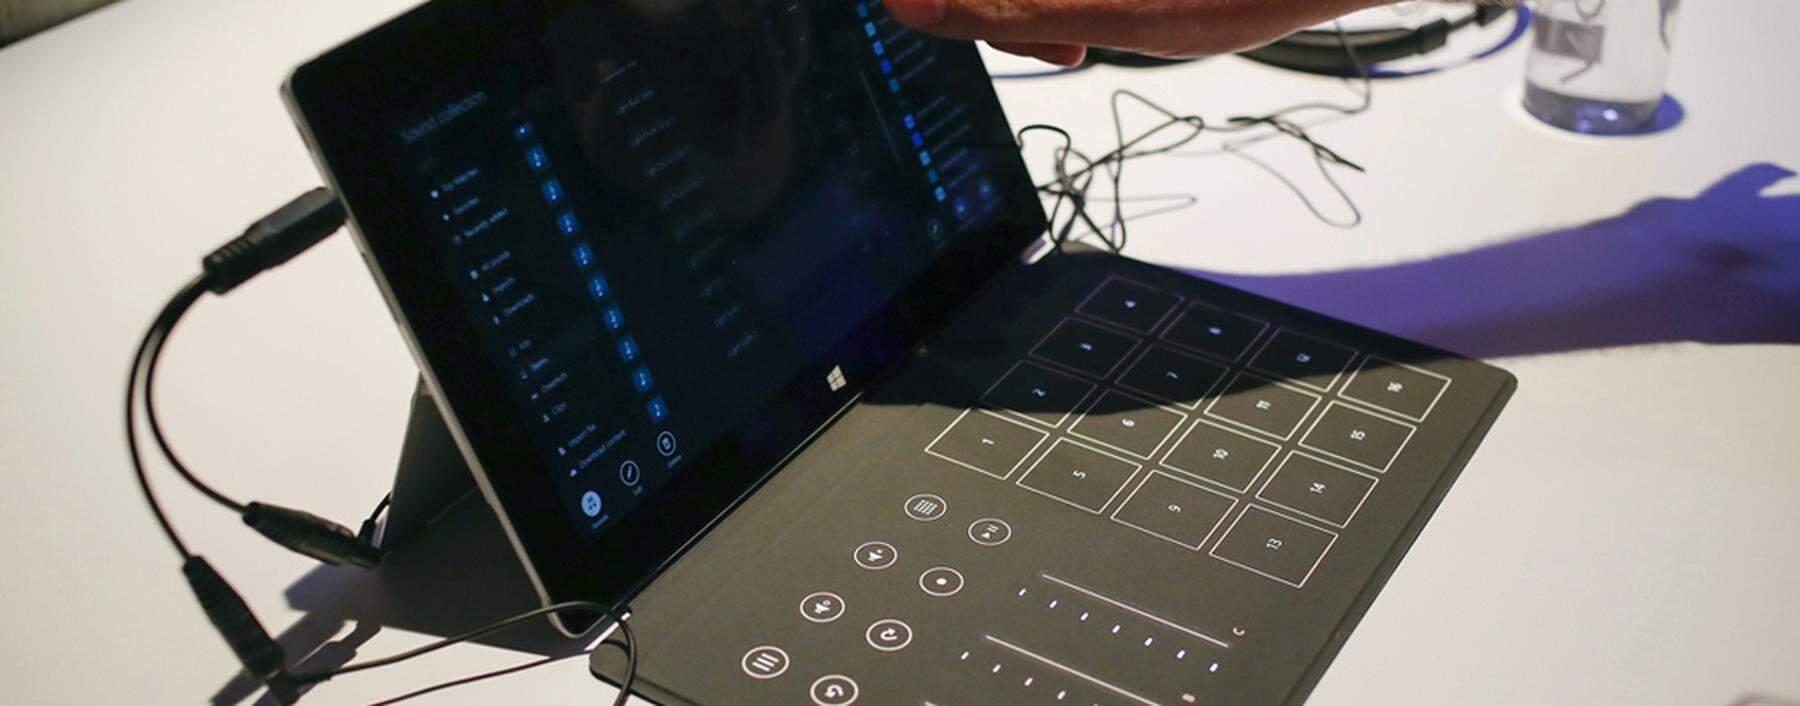 The Surface Remix Project for the Surface 2 tablets is seen during the launch of the Microsoft Surface 2 tablets in New York